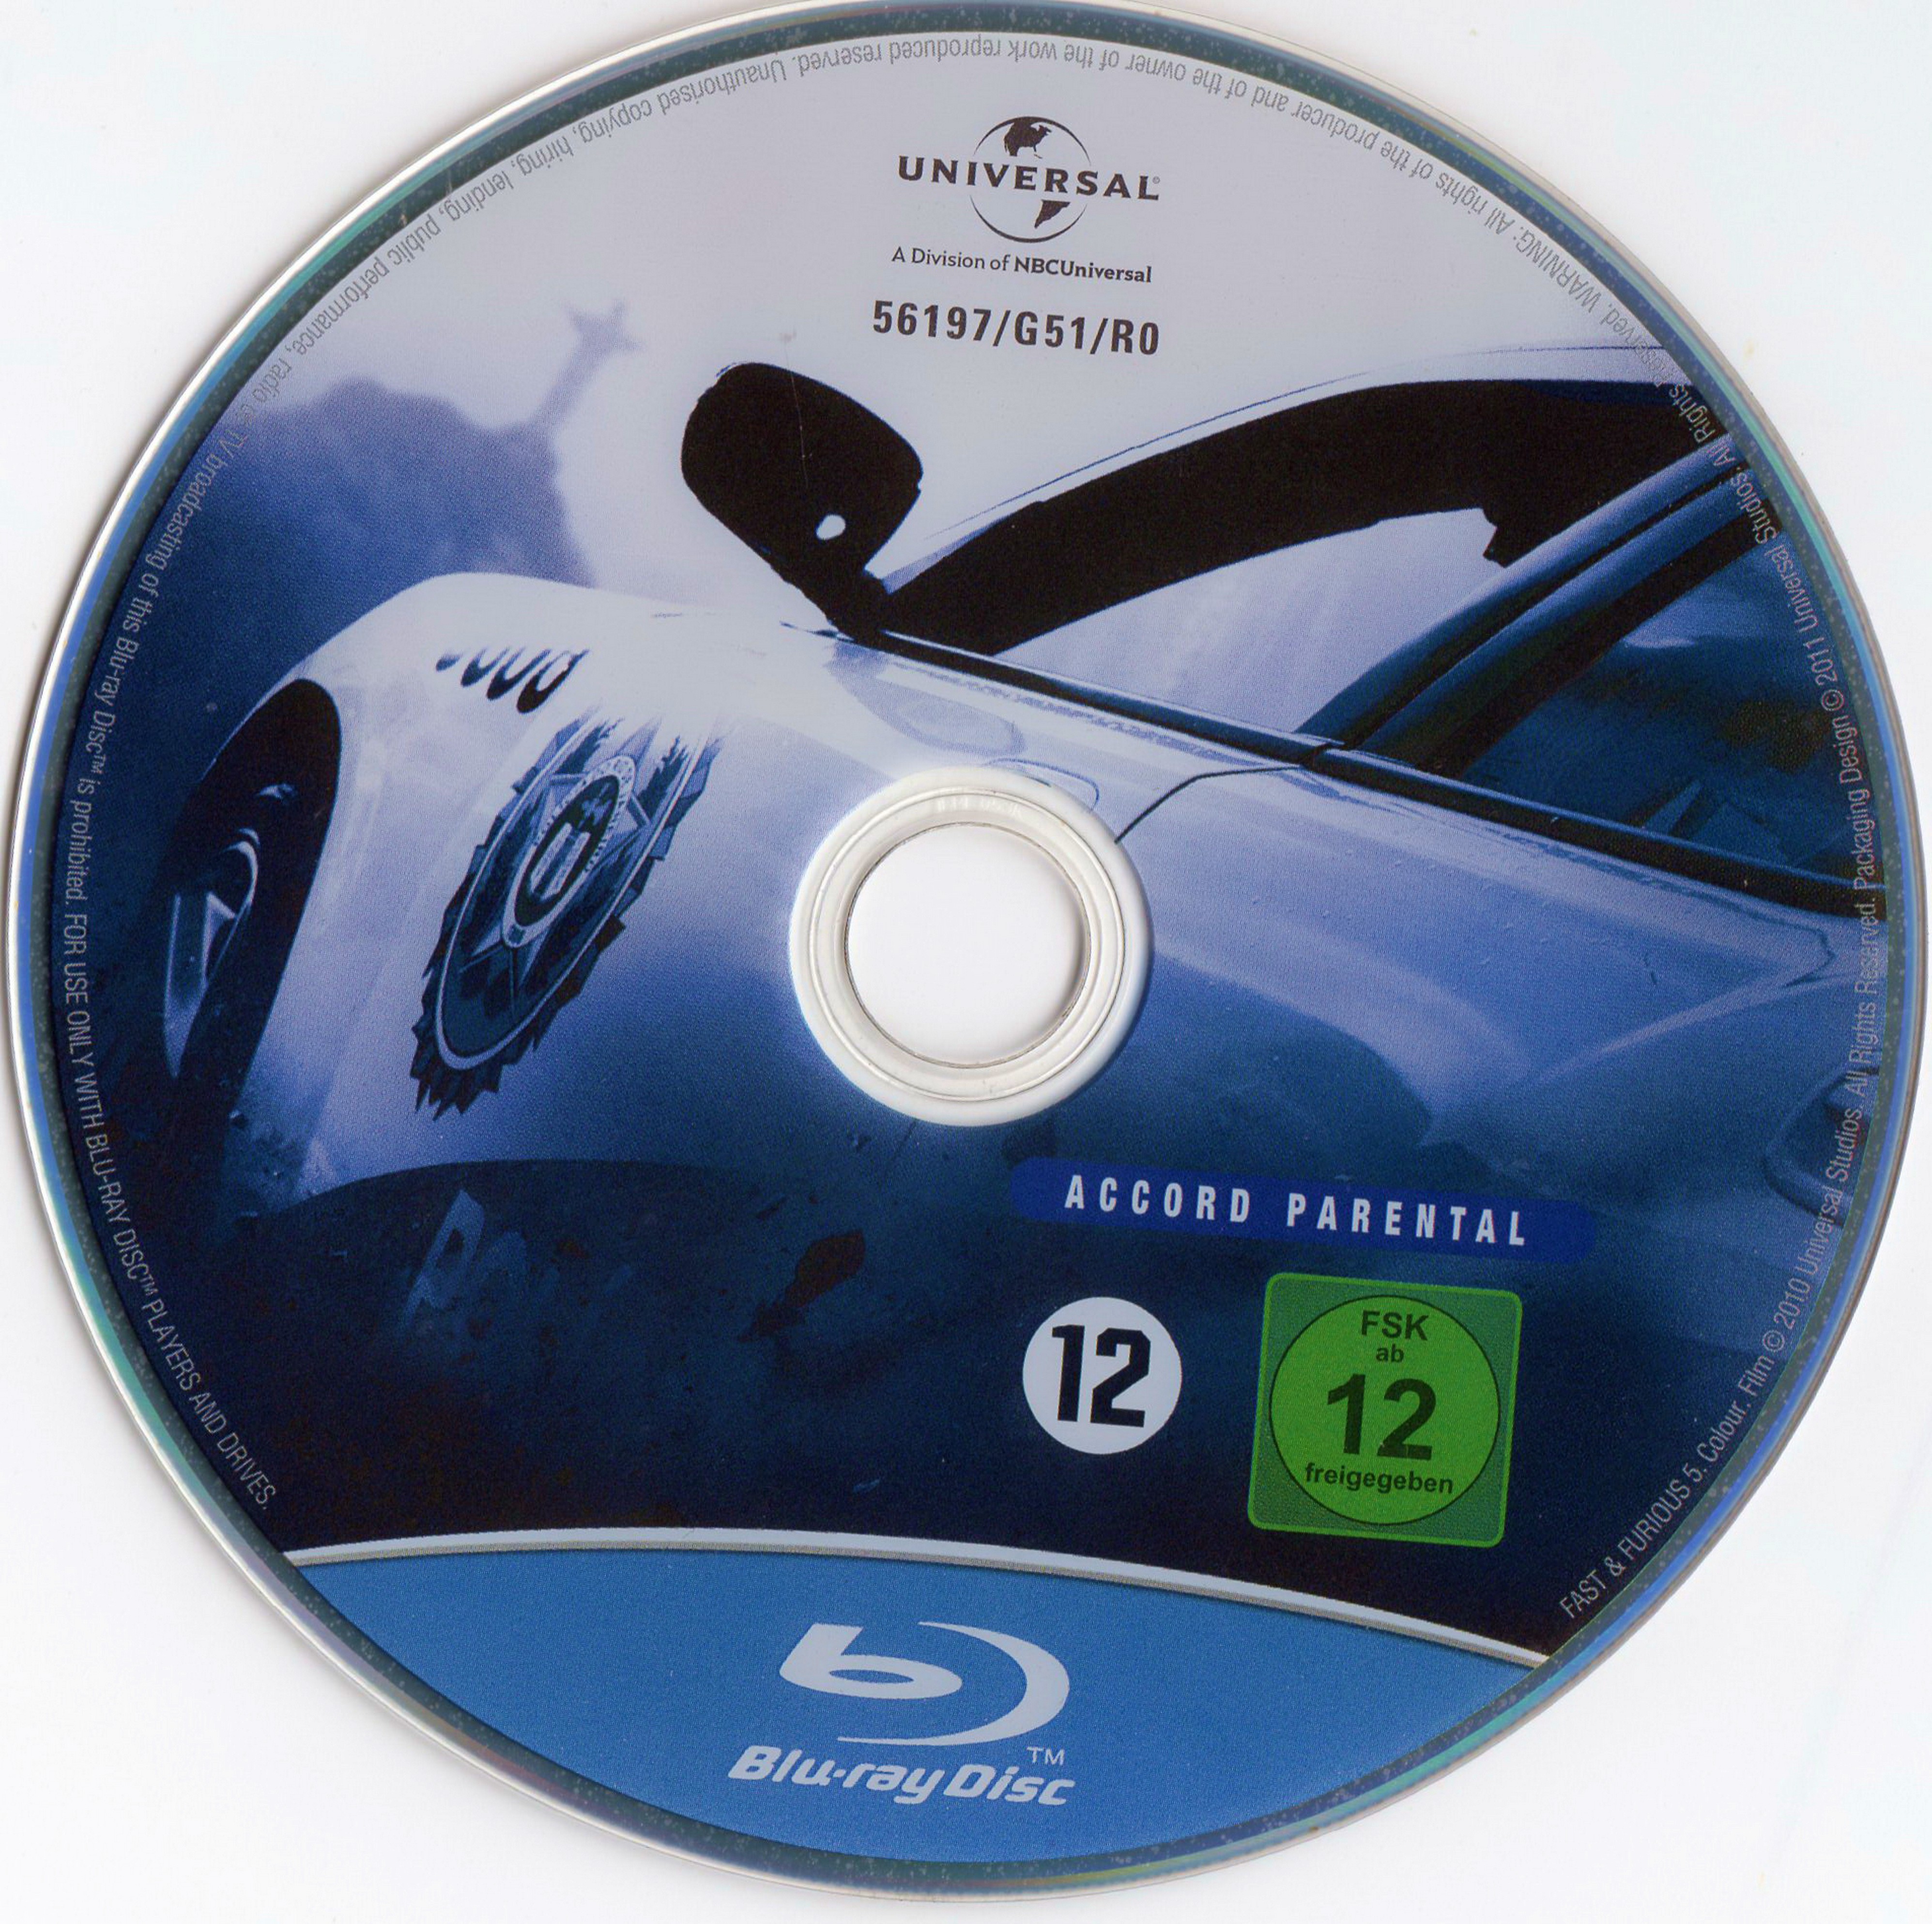 Fast and furious 5 (BLU-RAY)